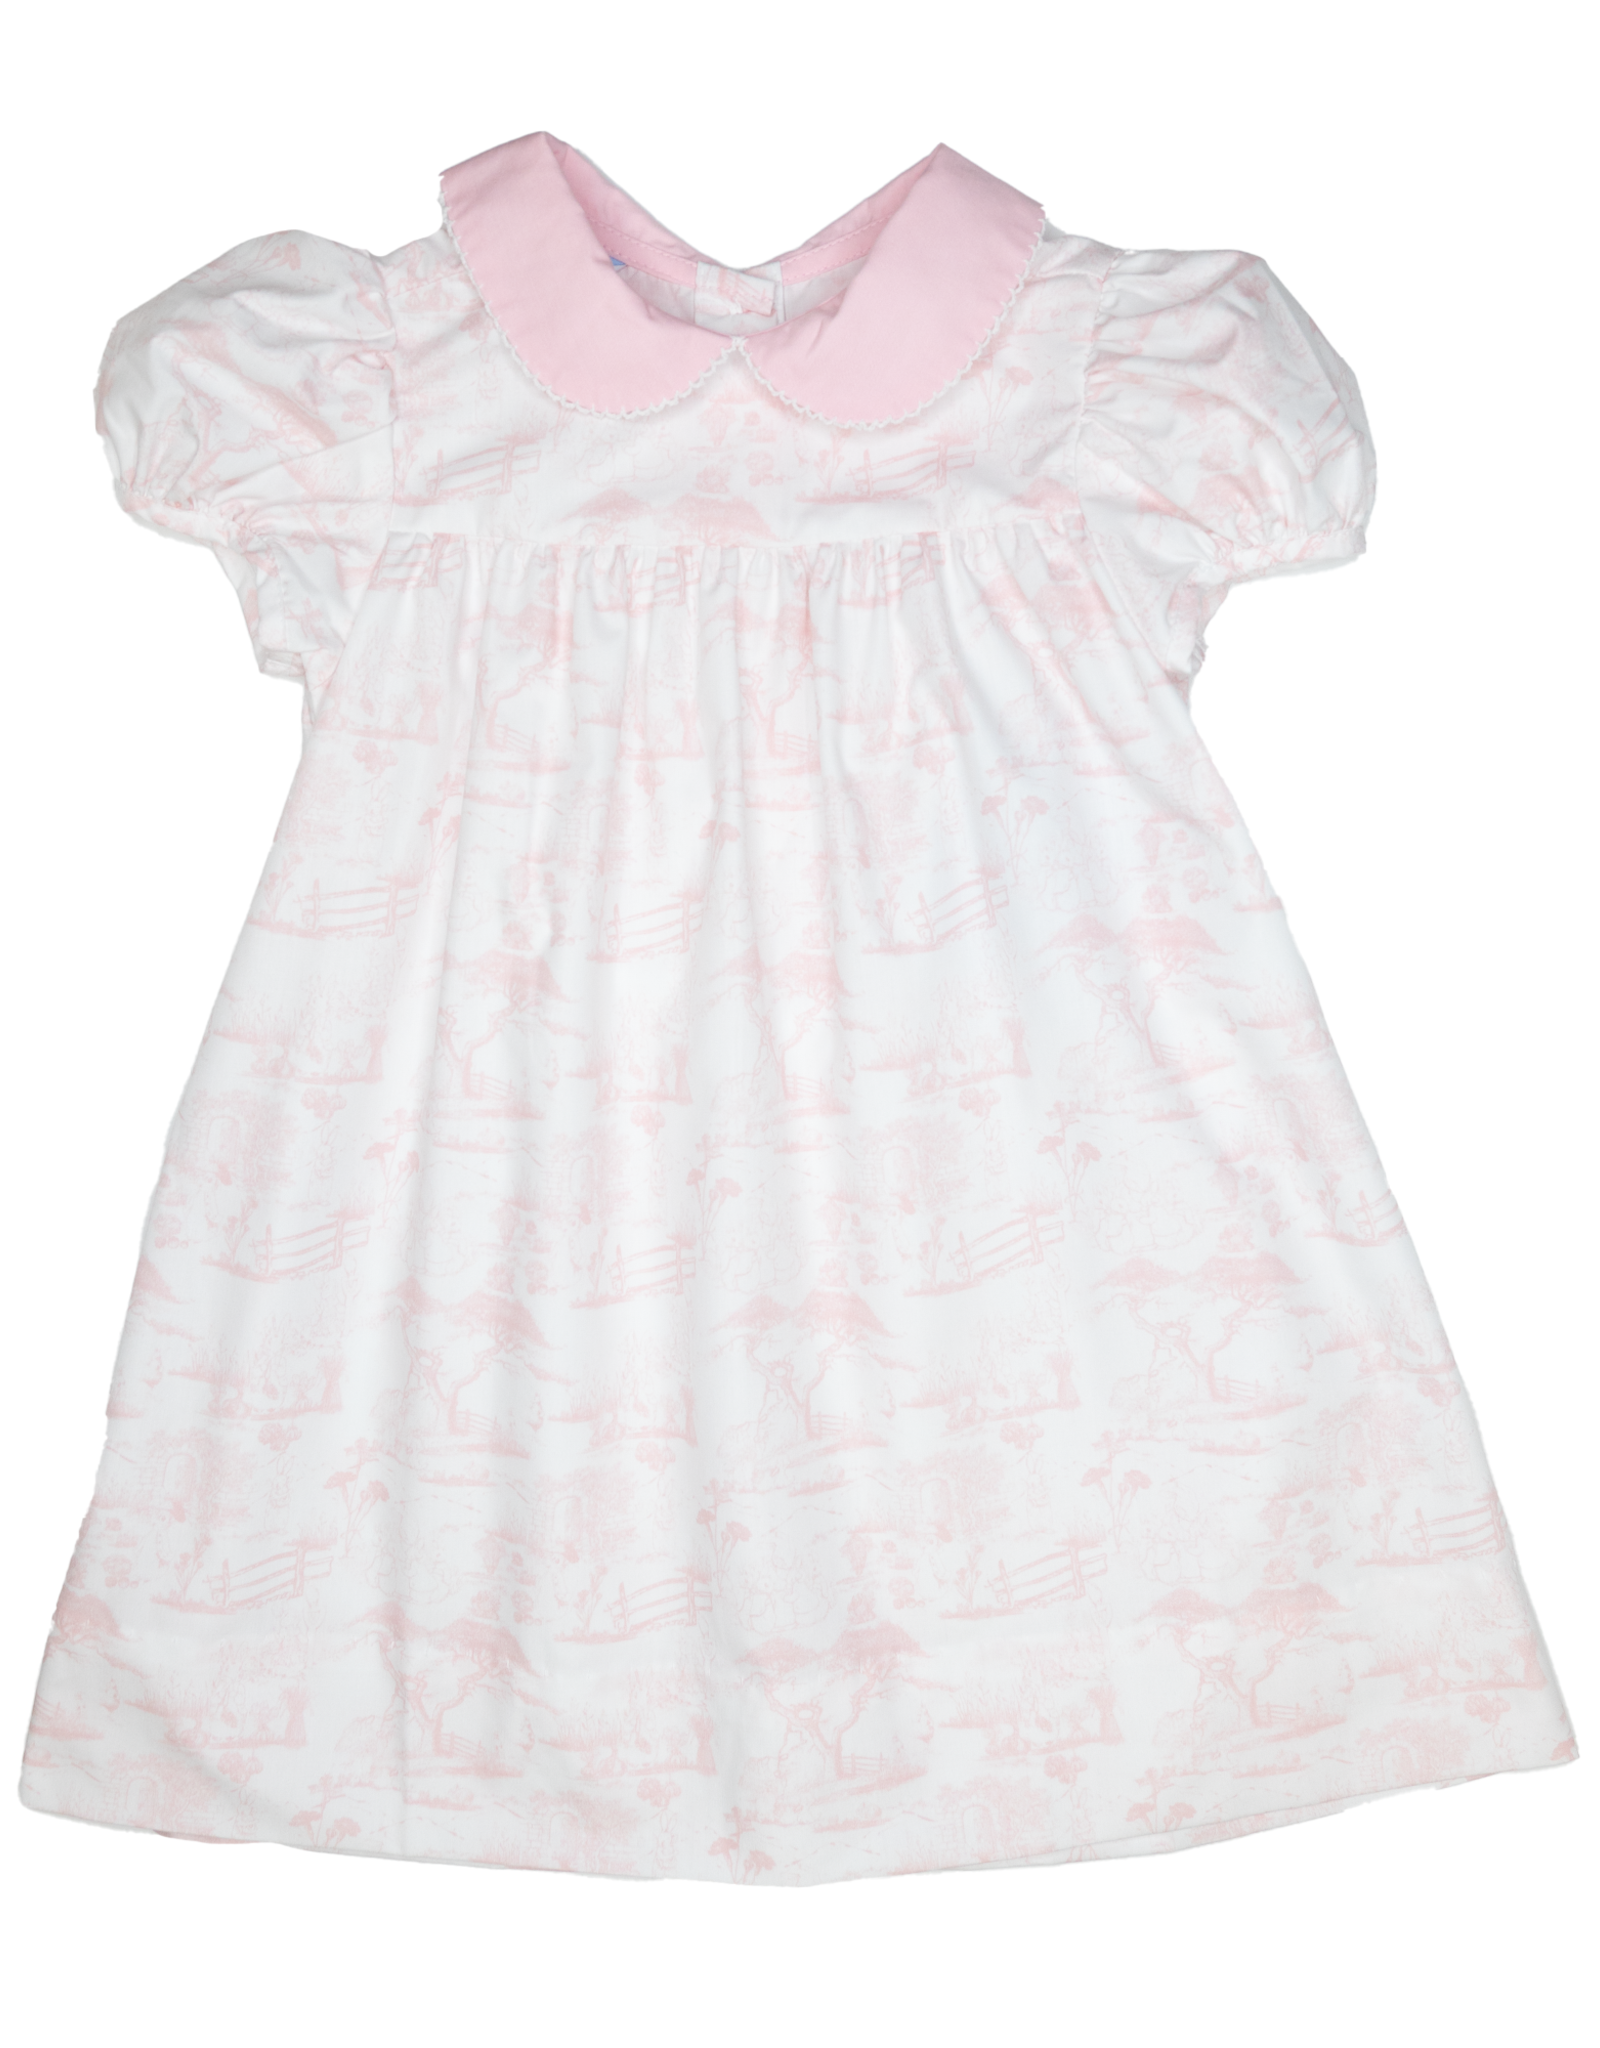 Charming Little One GQ1312 Pink Bunny Toile Dress